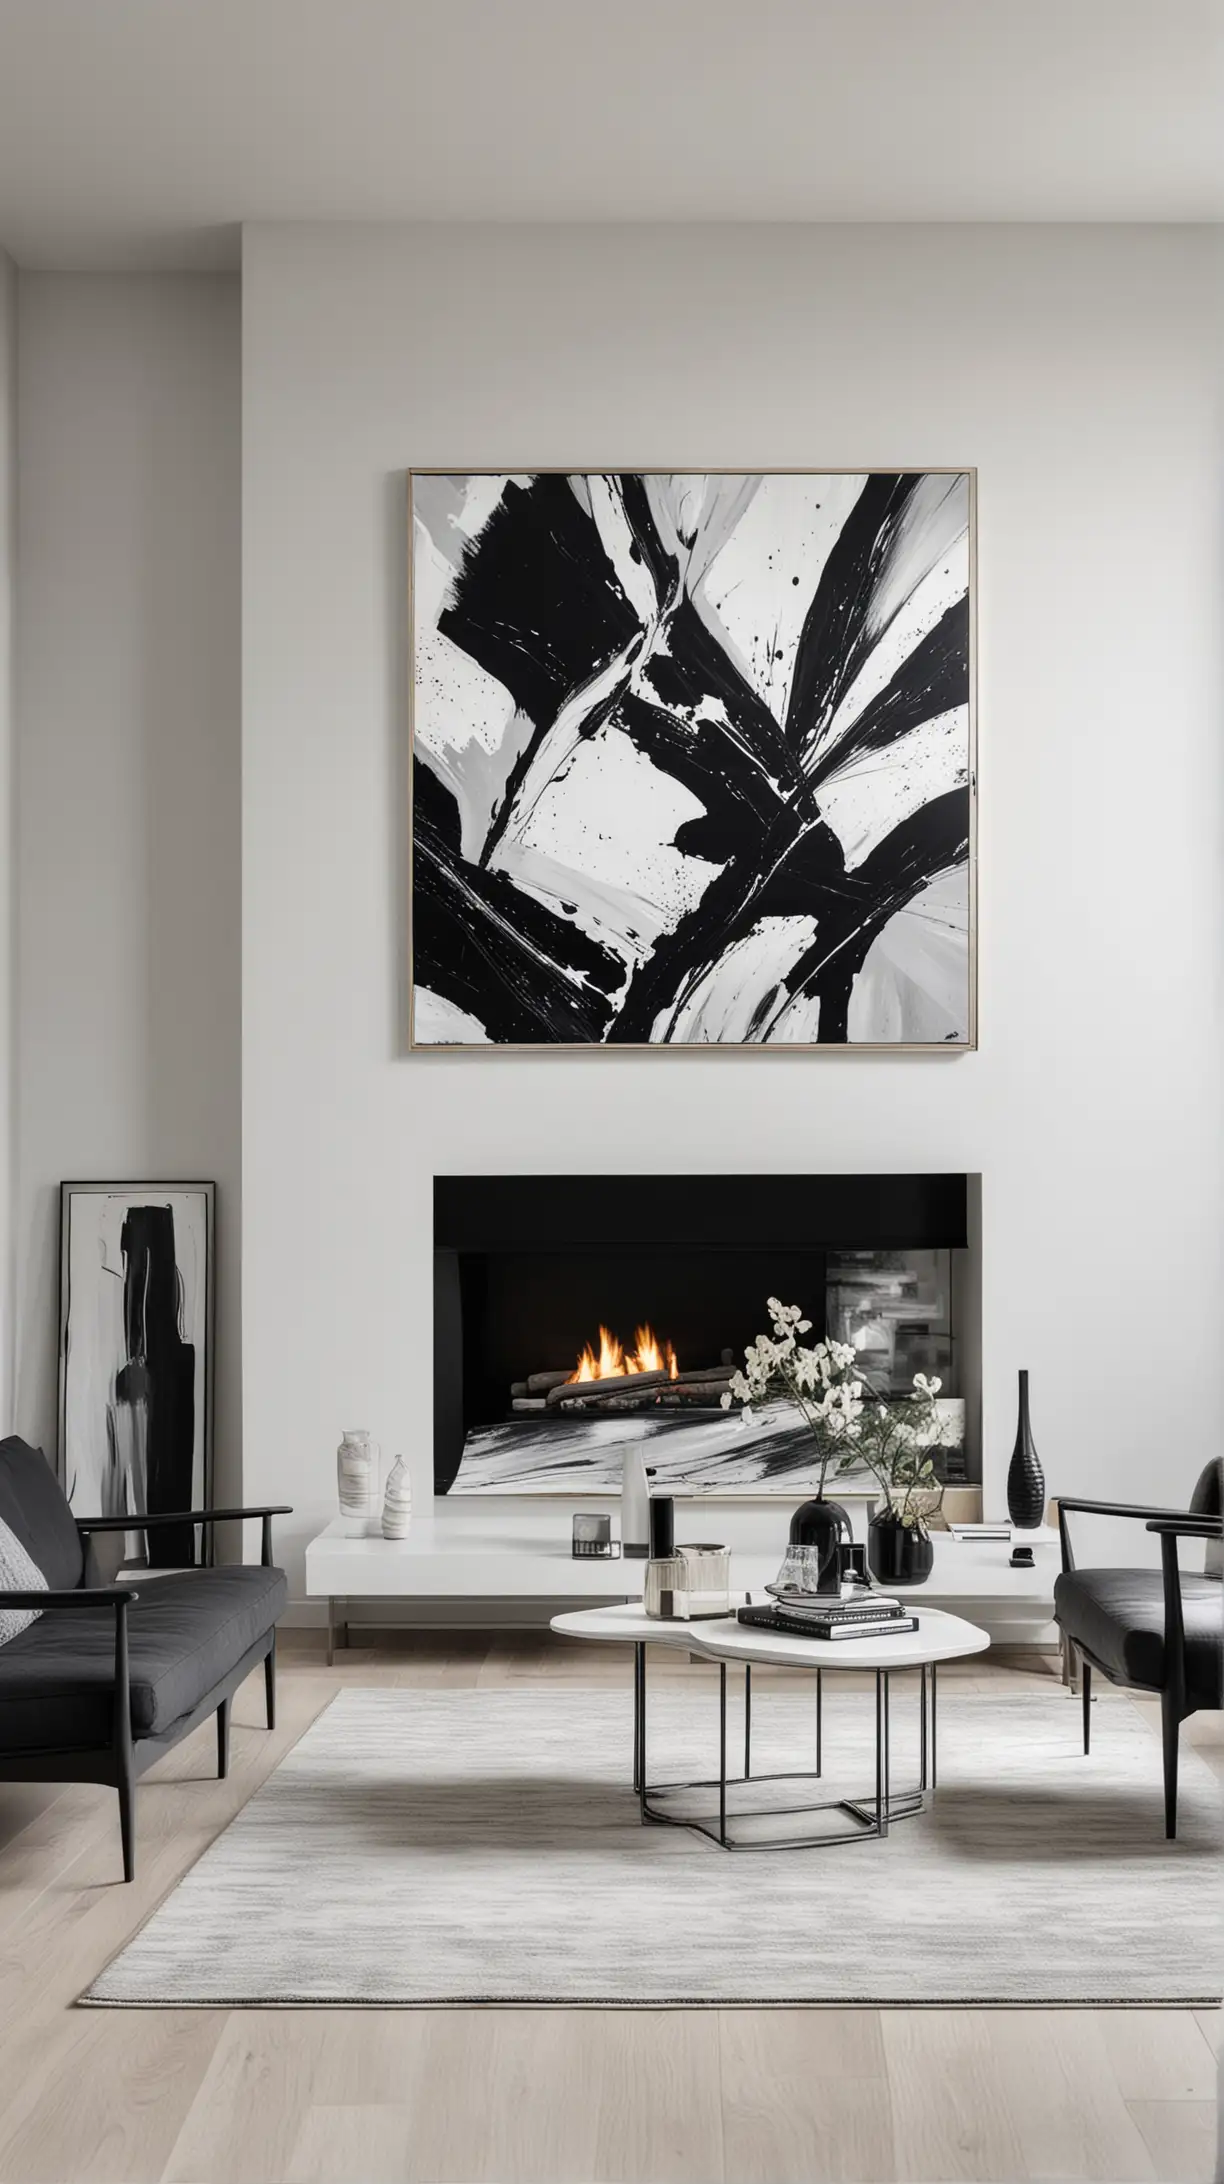 A sleek and sophisticated minimalist monochrome living room with black and white furniture, abstract wall art, and clean lines, modern style.